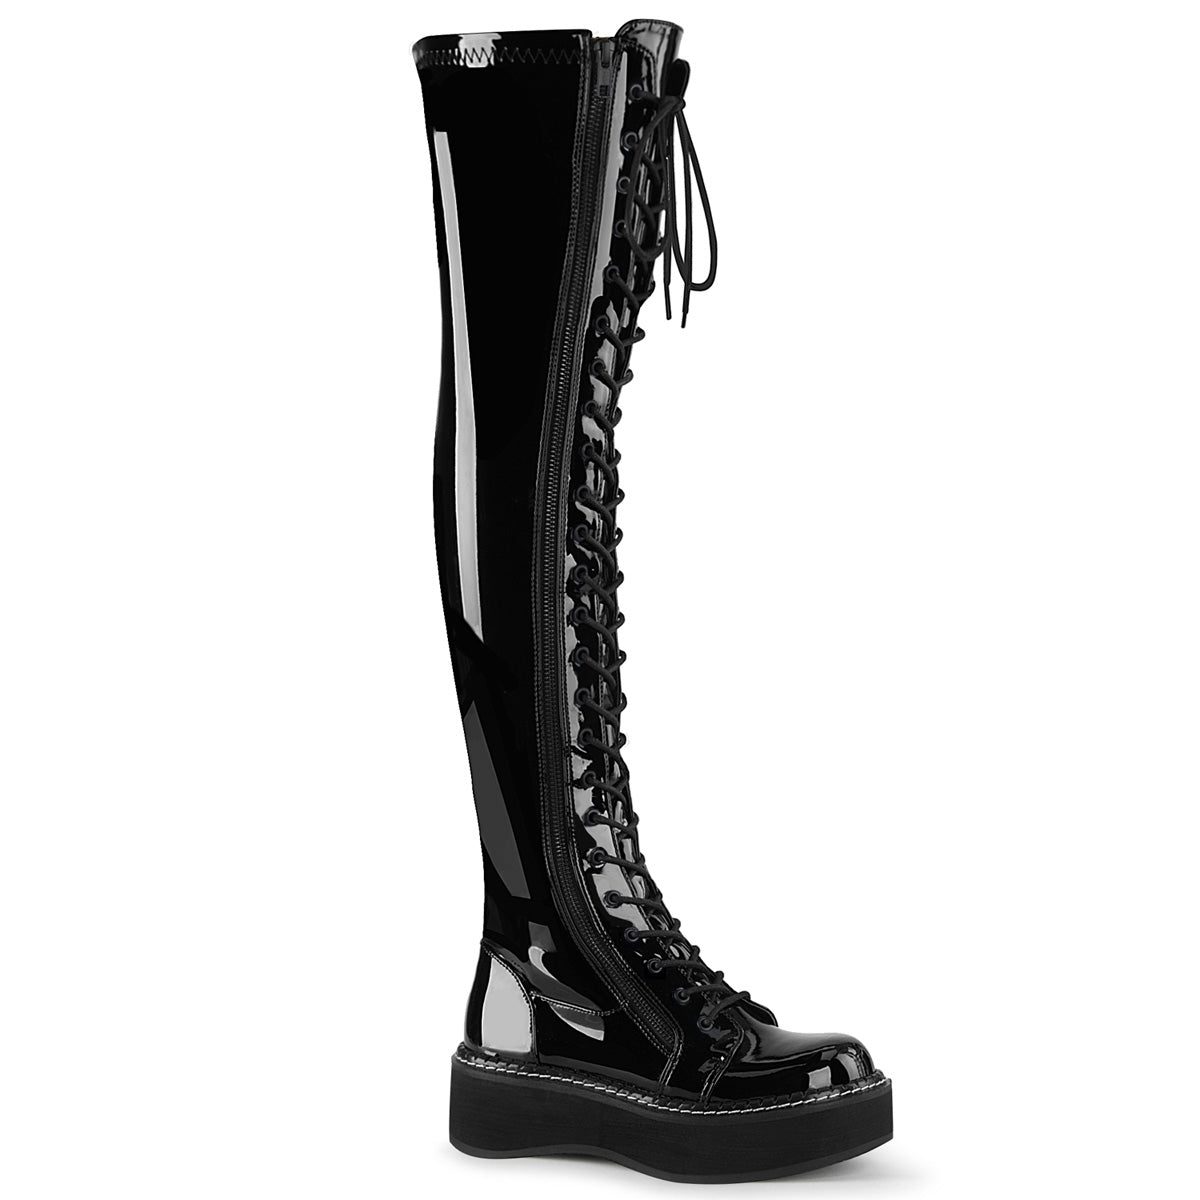 Black patent emily over-the-knee 2" platform boots.